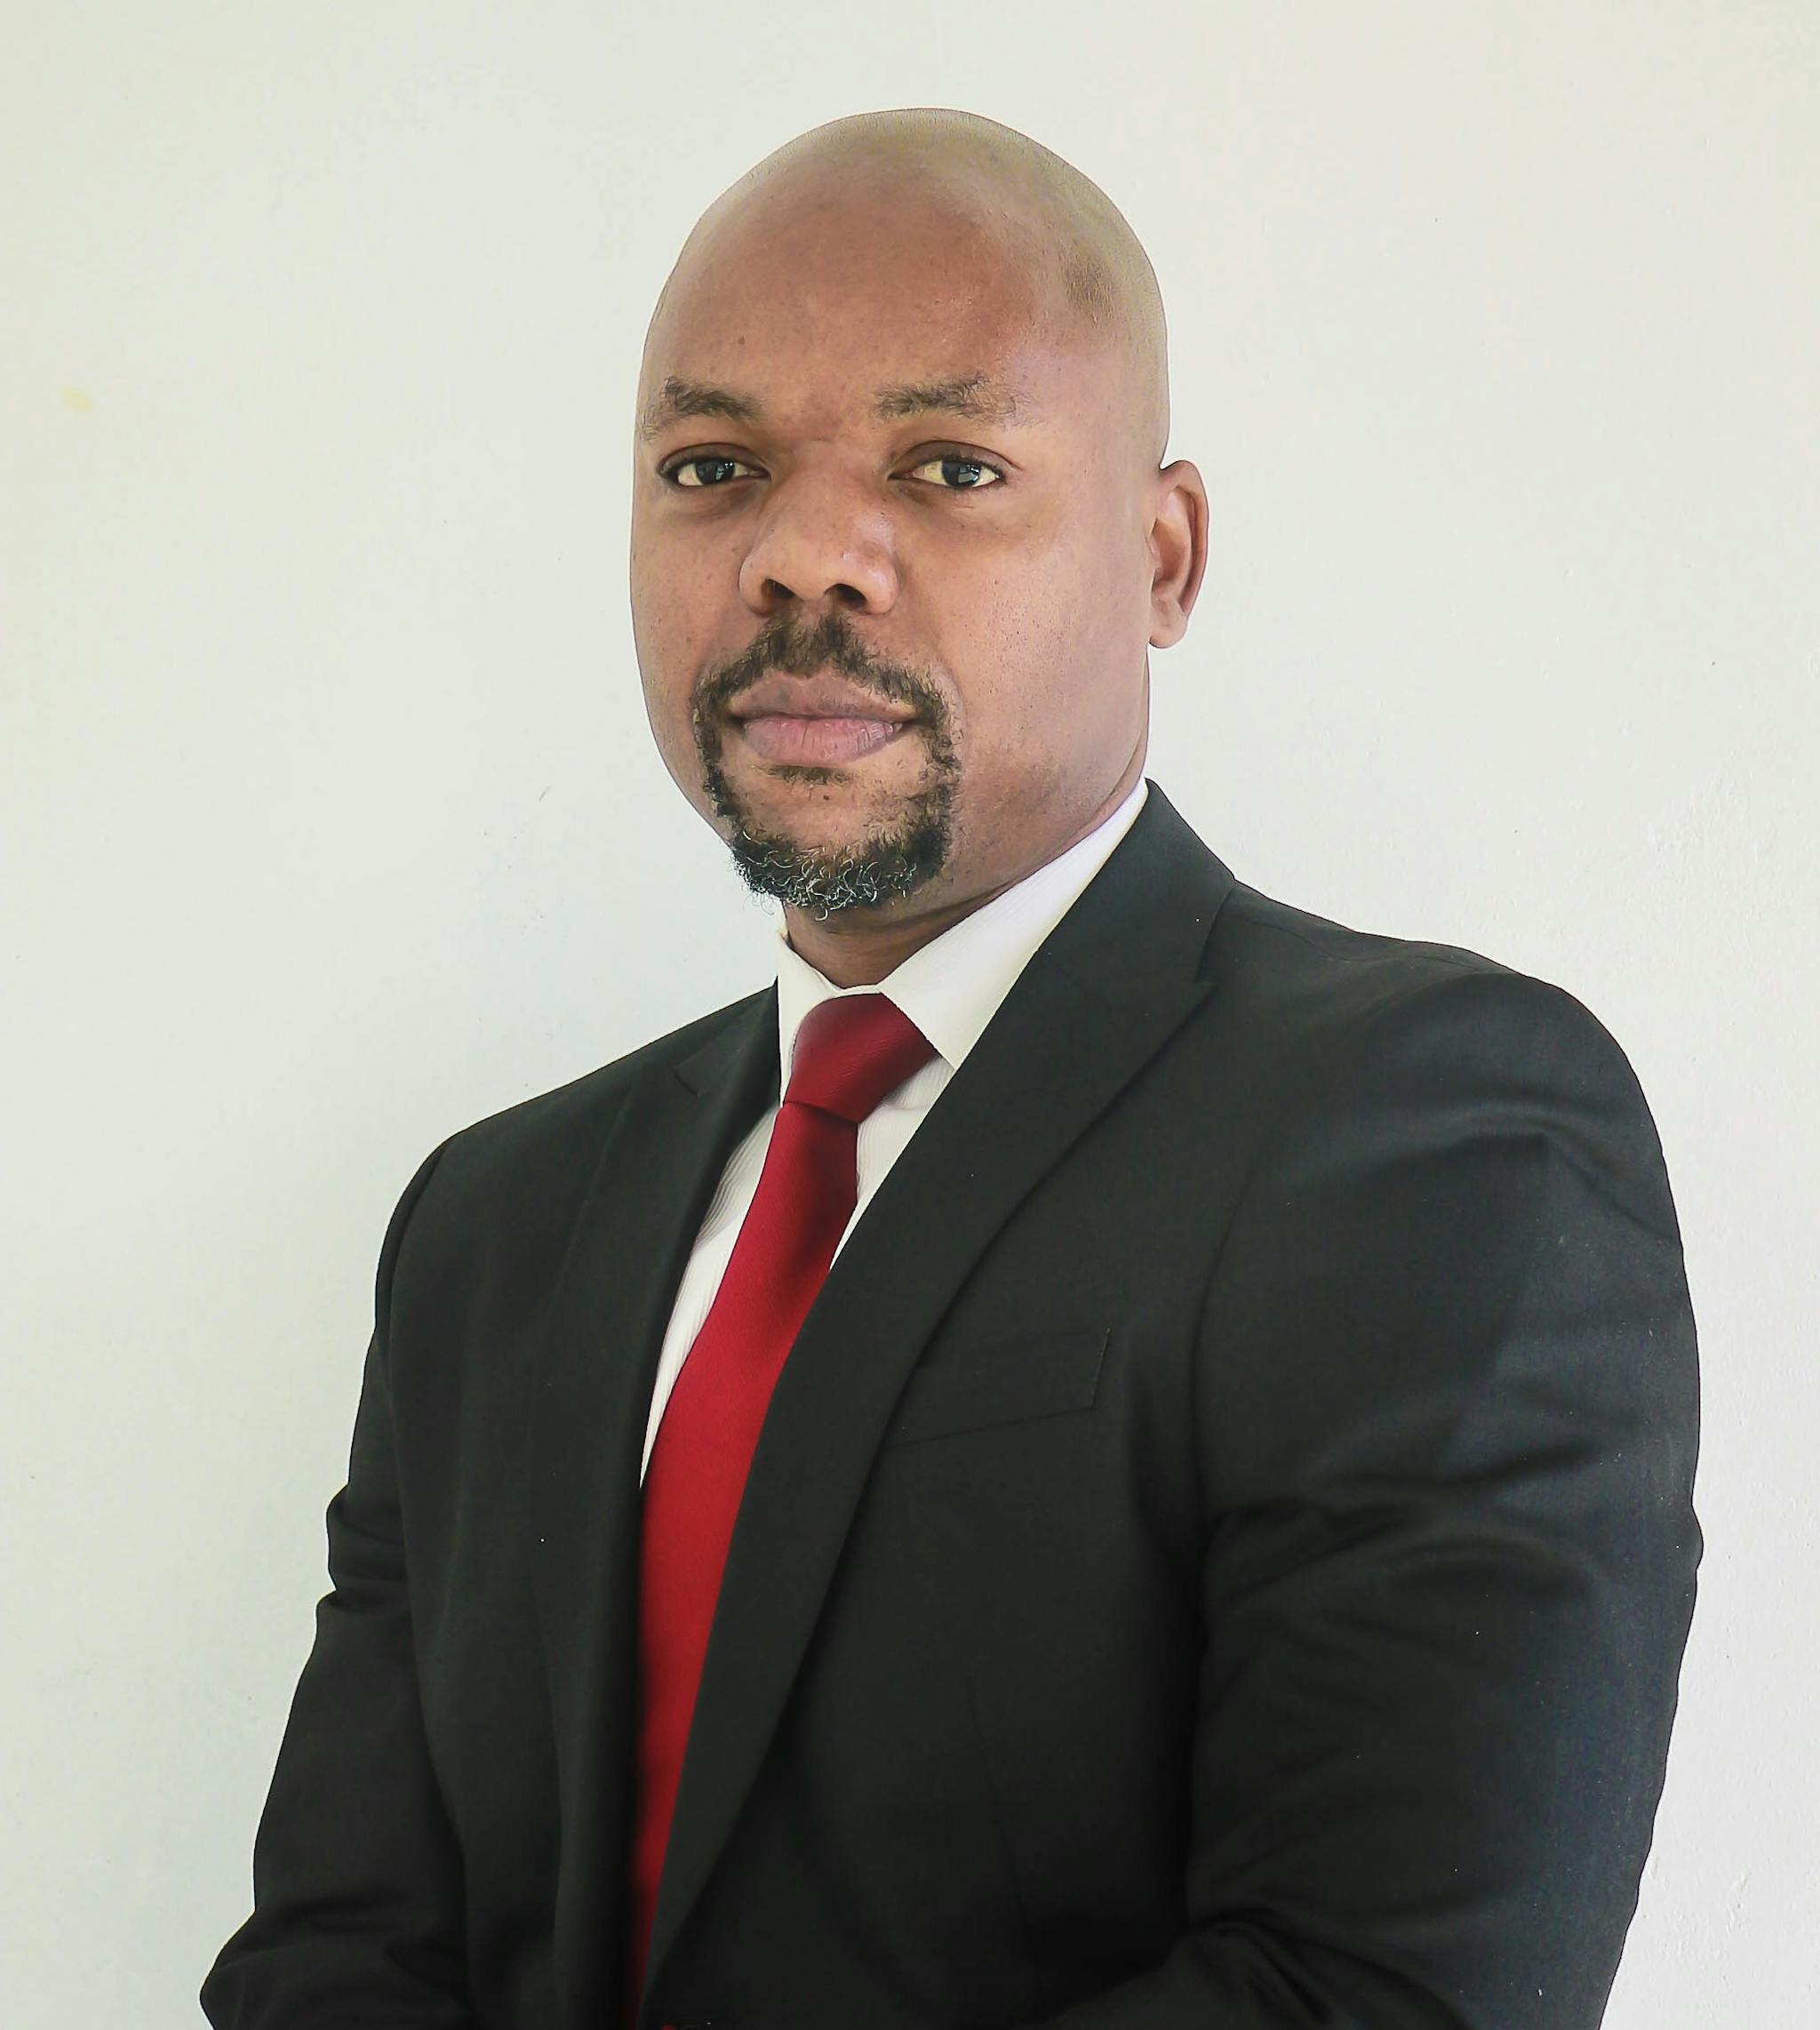 B Mathebula in his work outfit (A black suit, with a white shirt and red tie)